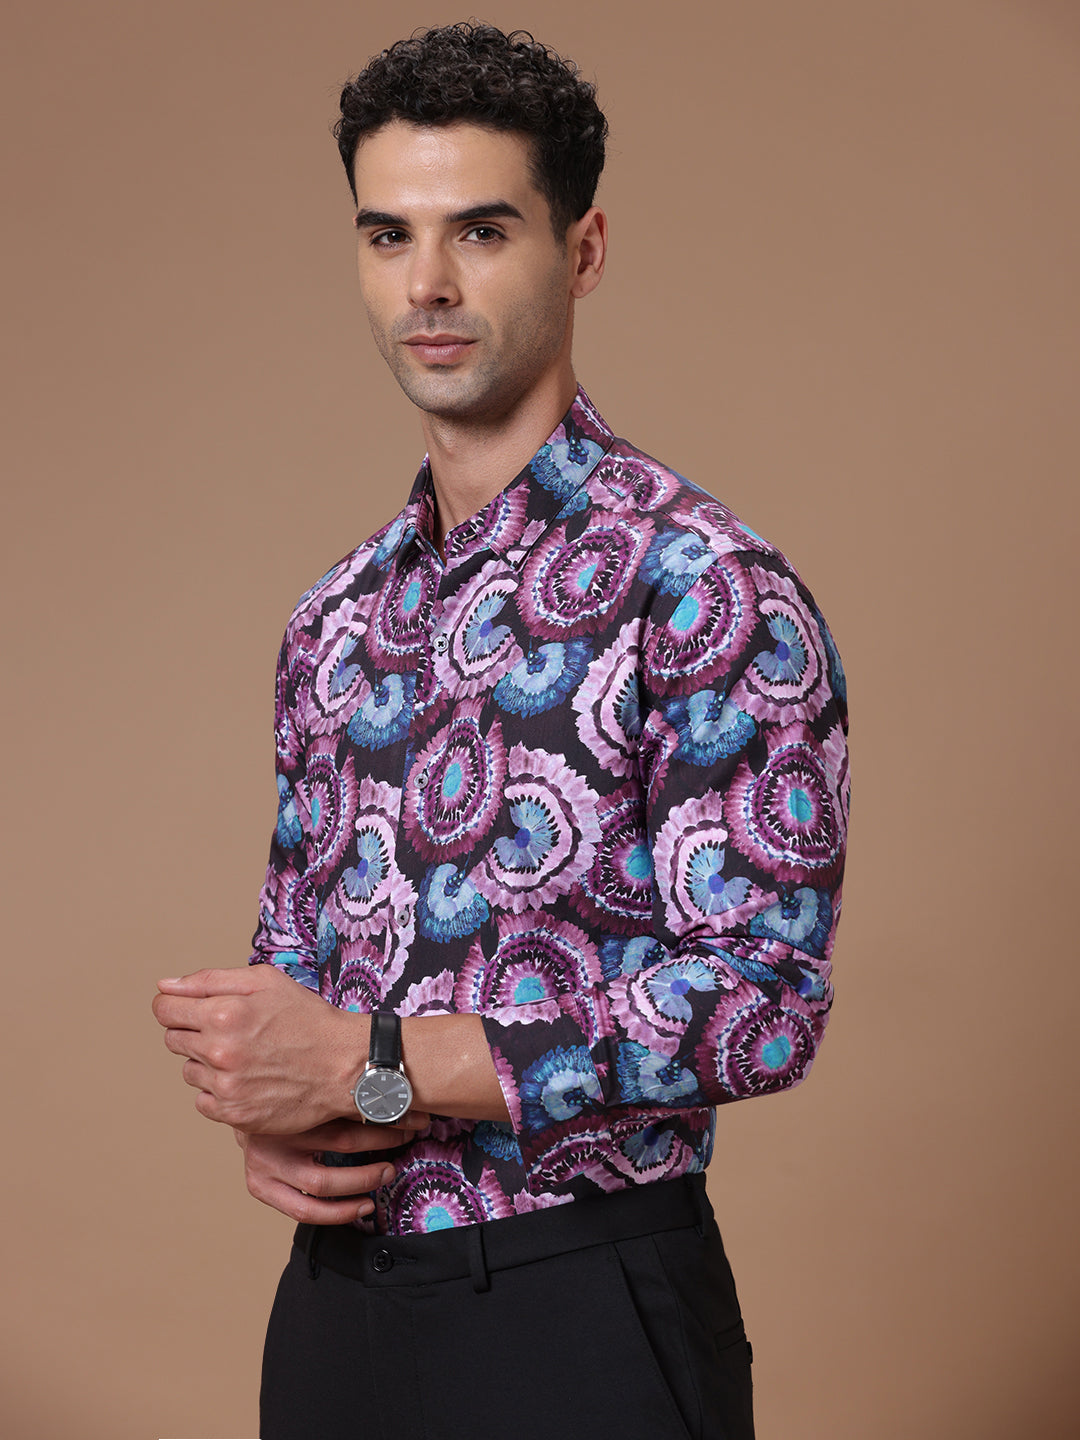 Comfort fit Cotton Viscose Printed Purple Smart casual Full sleeve Shirt (DUST)